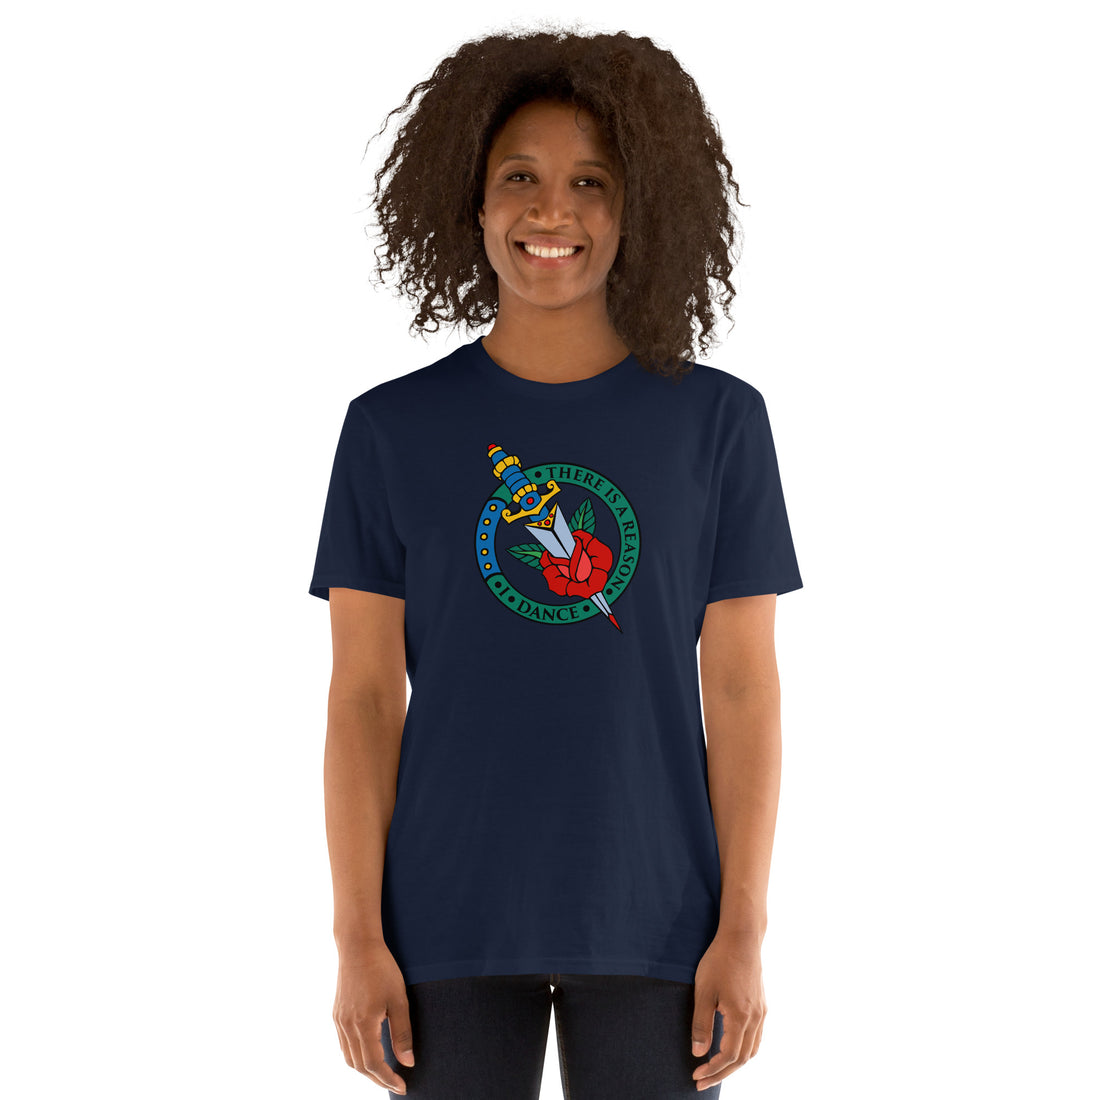 There is a Reason I Dance - T-Shirt - dagger, heart, rose, flower - a gift for a dance lover, dancer, belly dancing